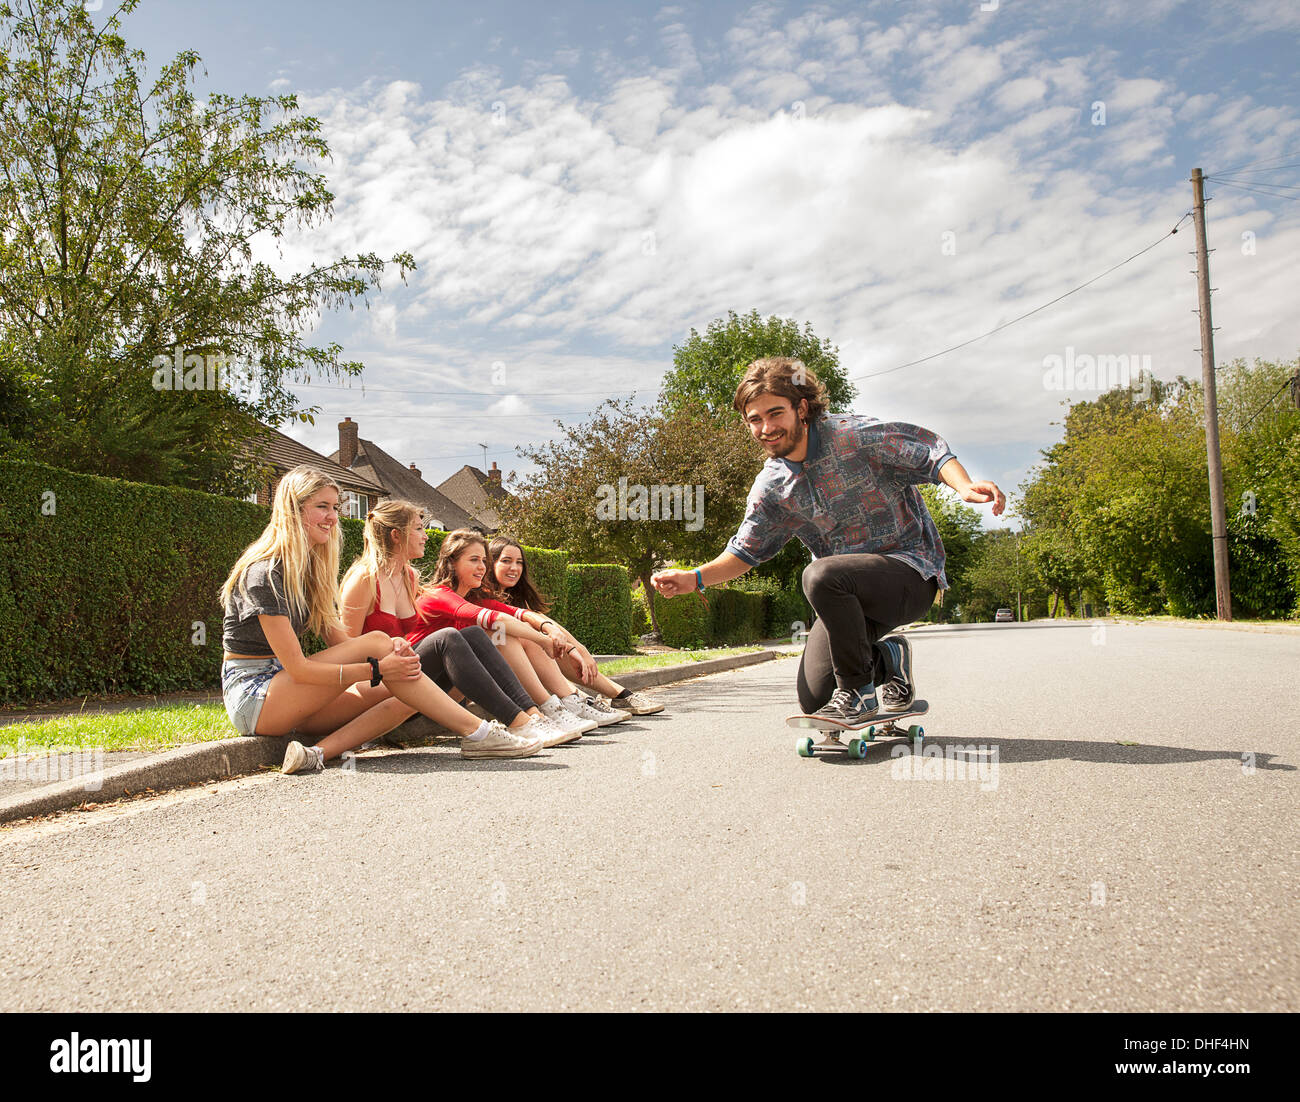 Four young women sitting on kerb watching skateboarder Stock Photo